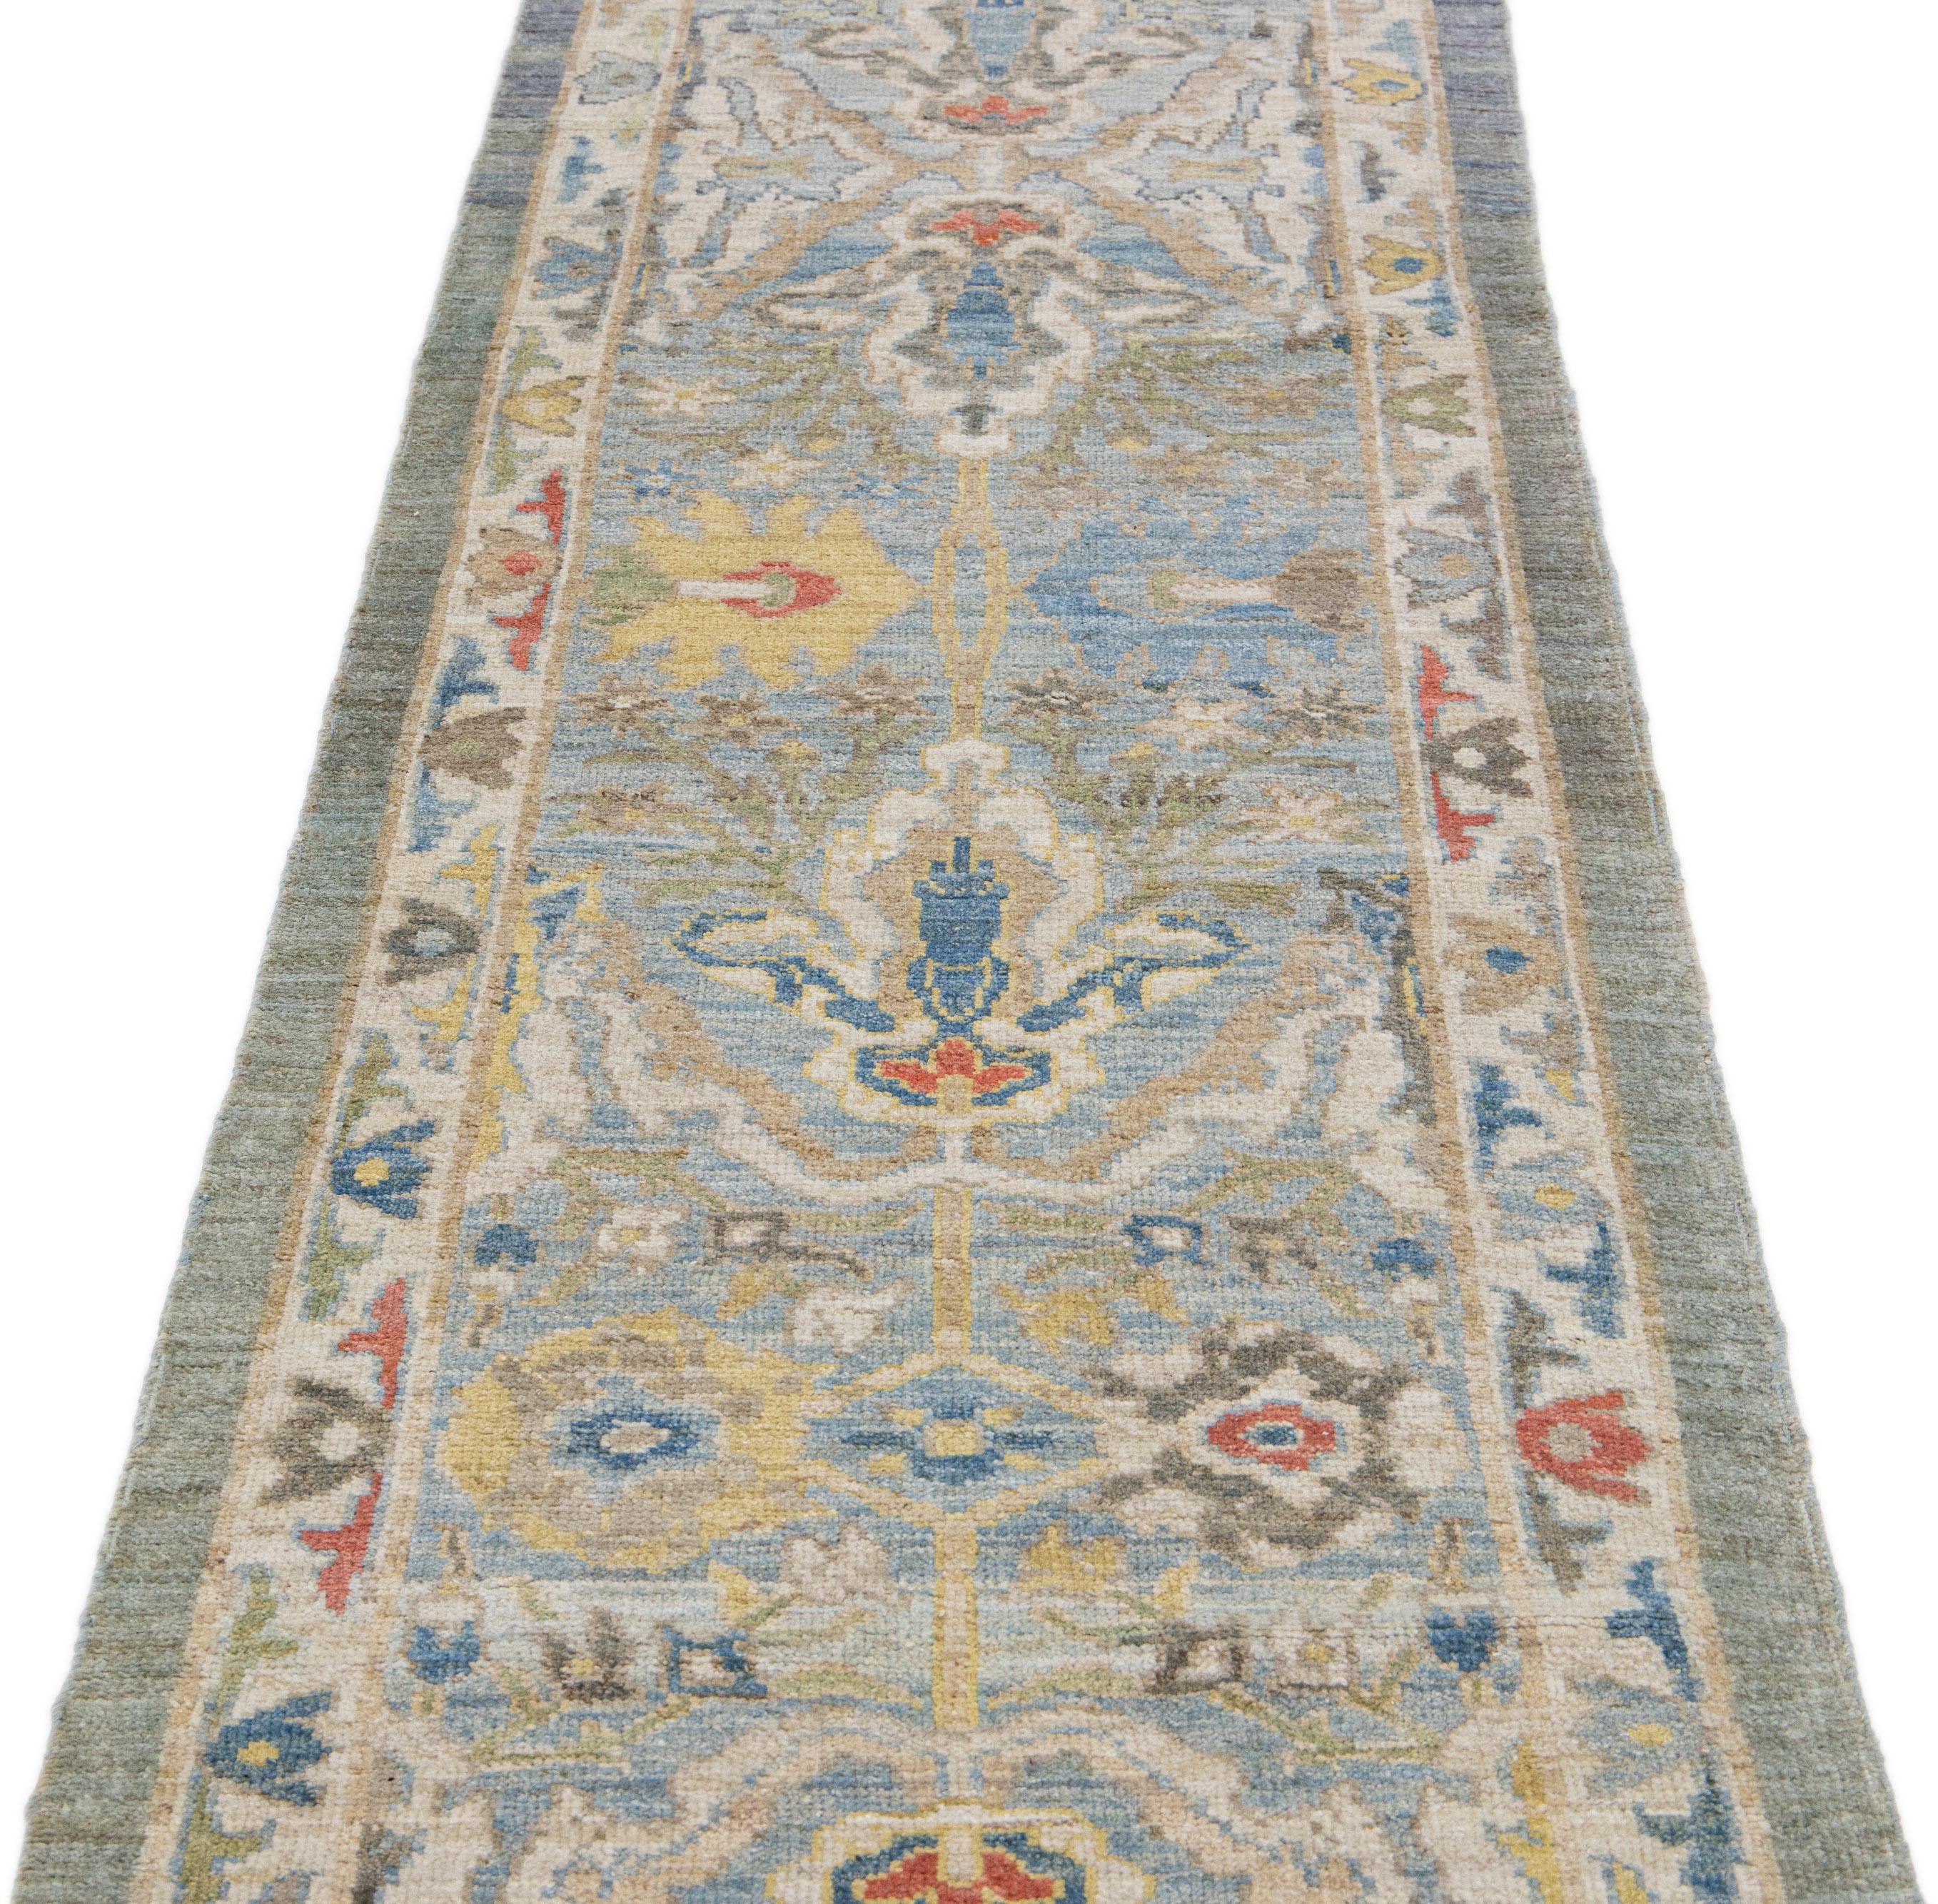 Beautiful modern Mahal hand-knotted wool runner with a blue field. This Piece has a yellow, green, and orange accent in a gorgeous all-over Classic floral design.

This rug measures: 2'7